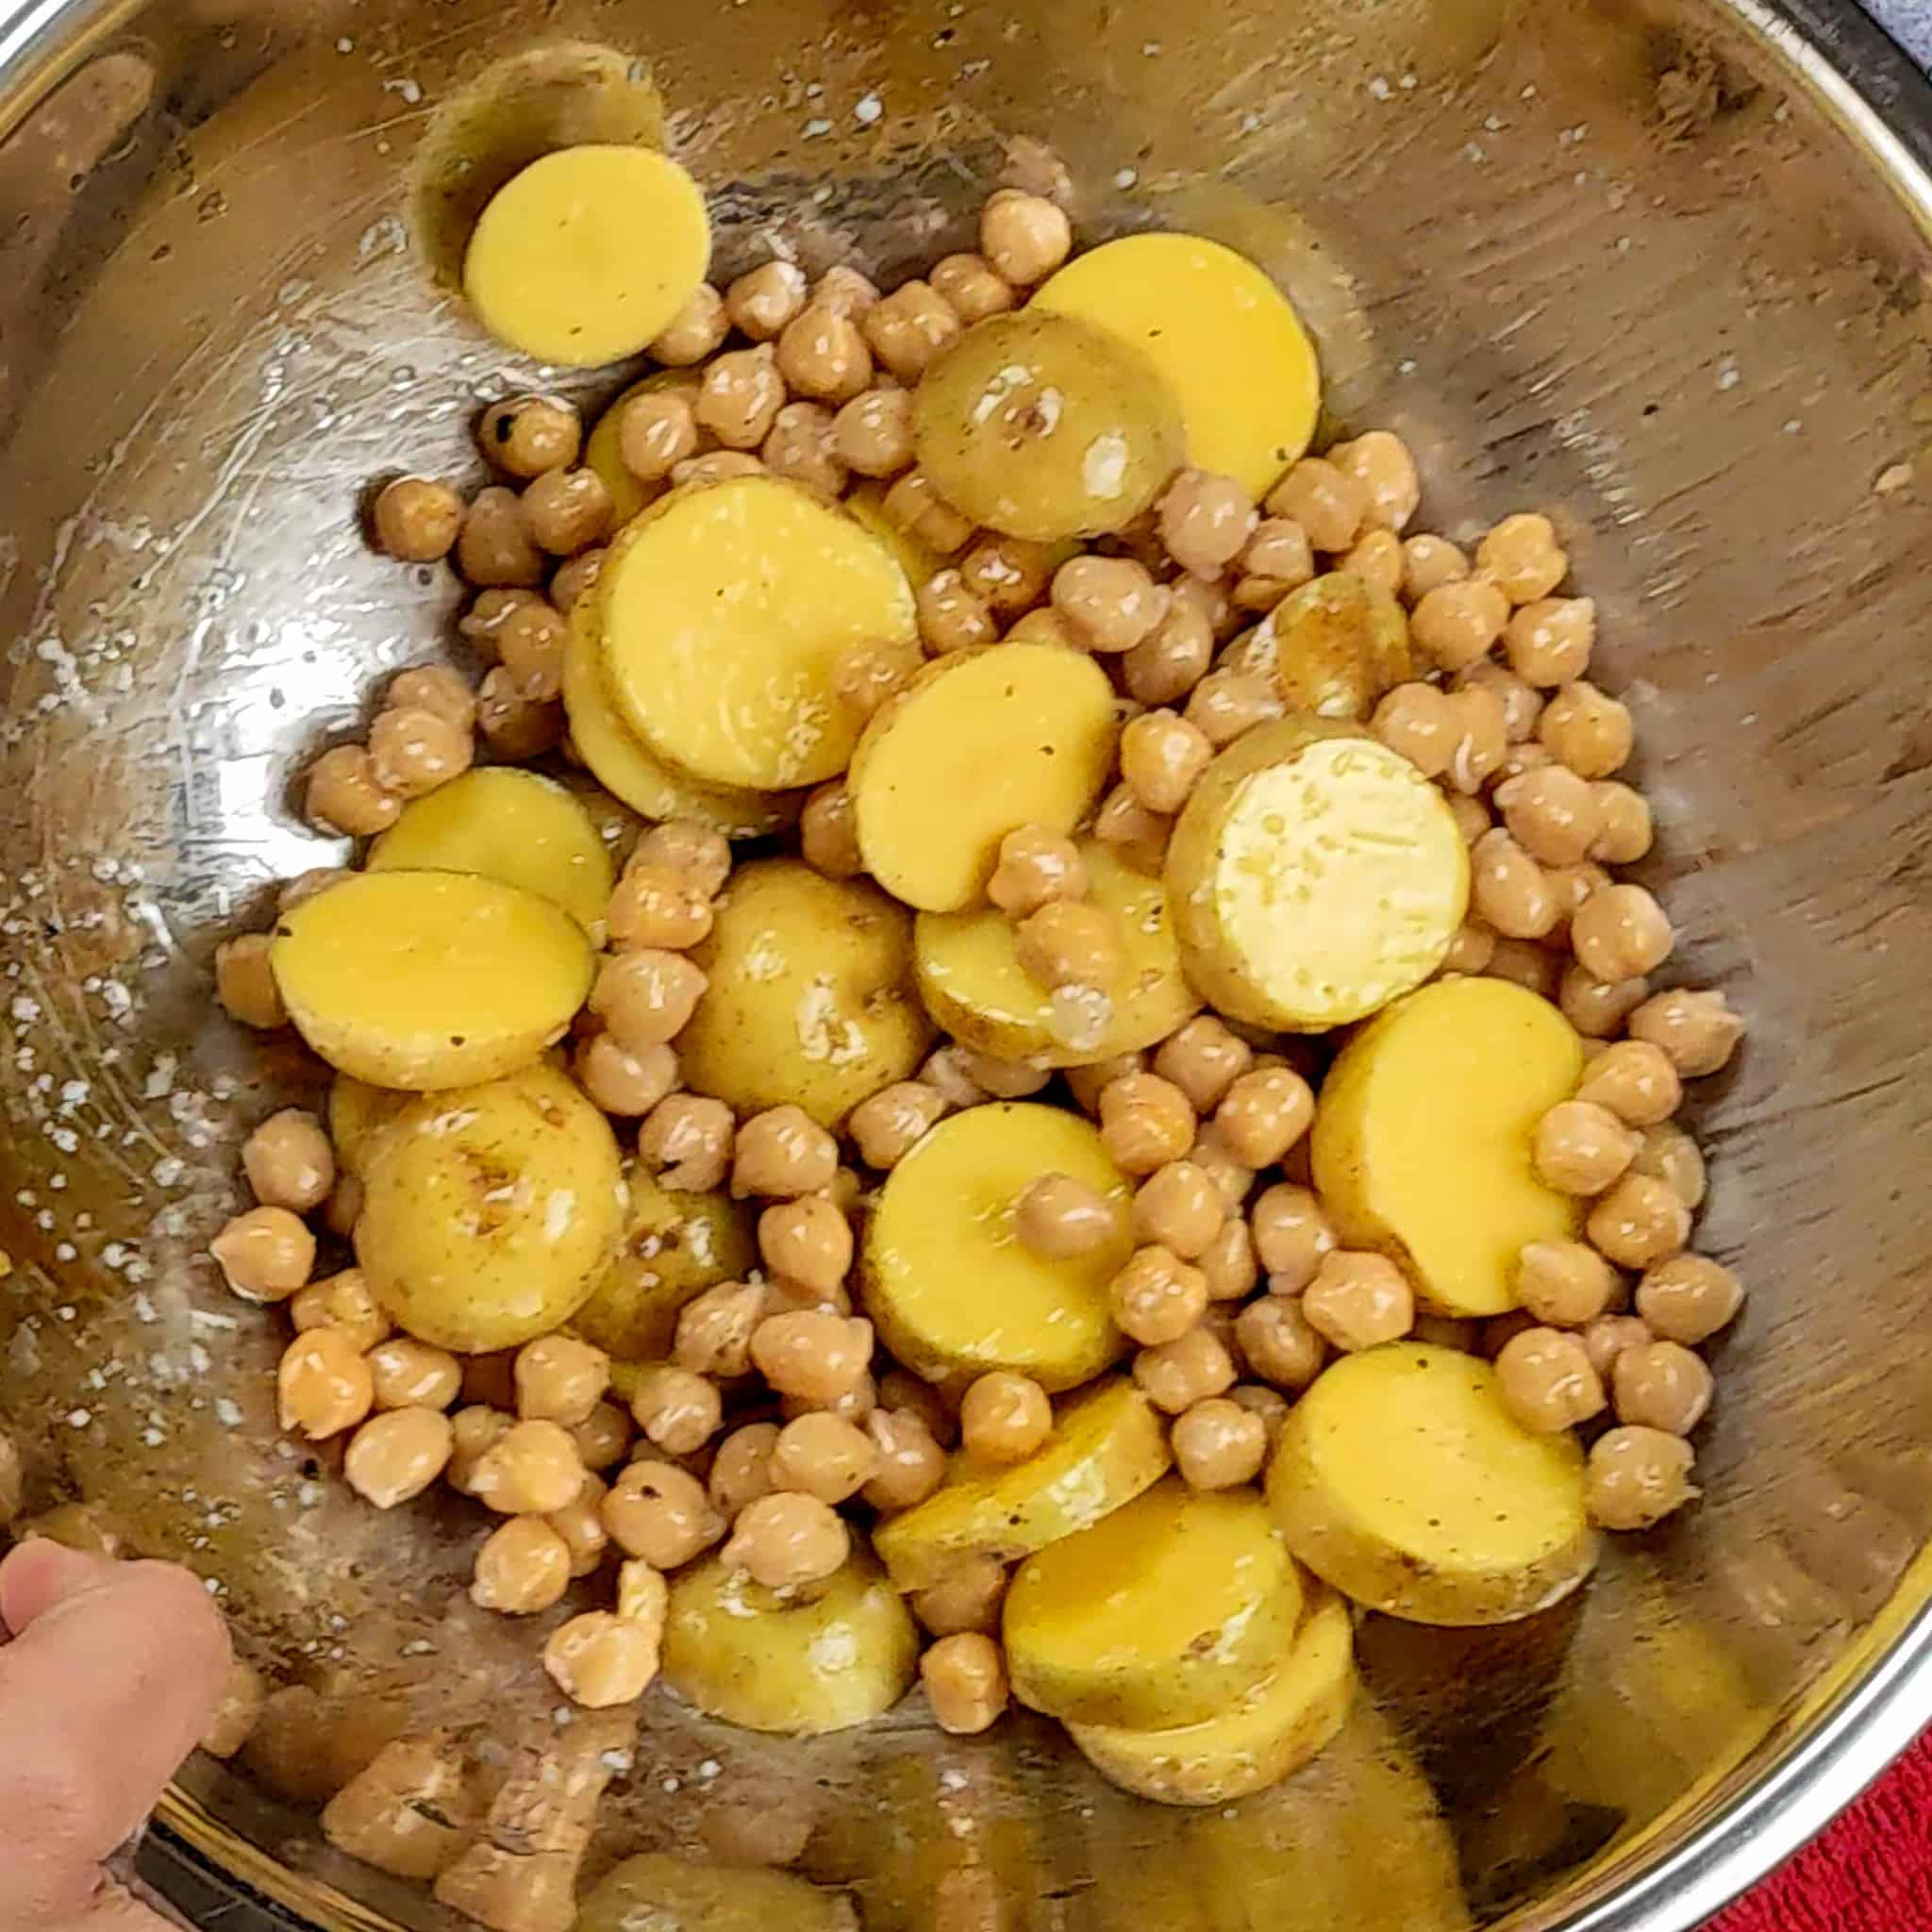 canned chickpeas and sliced baby Dutch potatoes tossed in avocado oil, salt and pepper in a stainless large mixing bowl